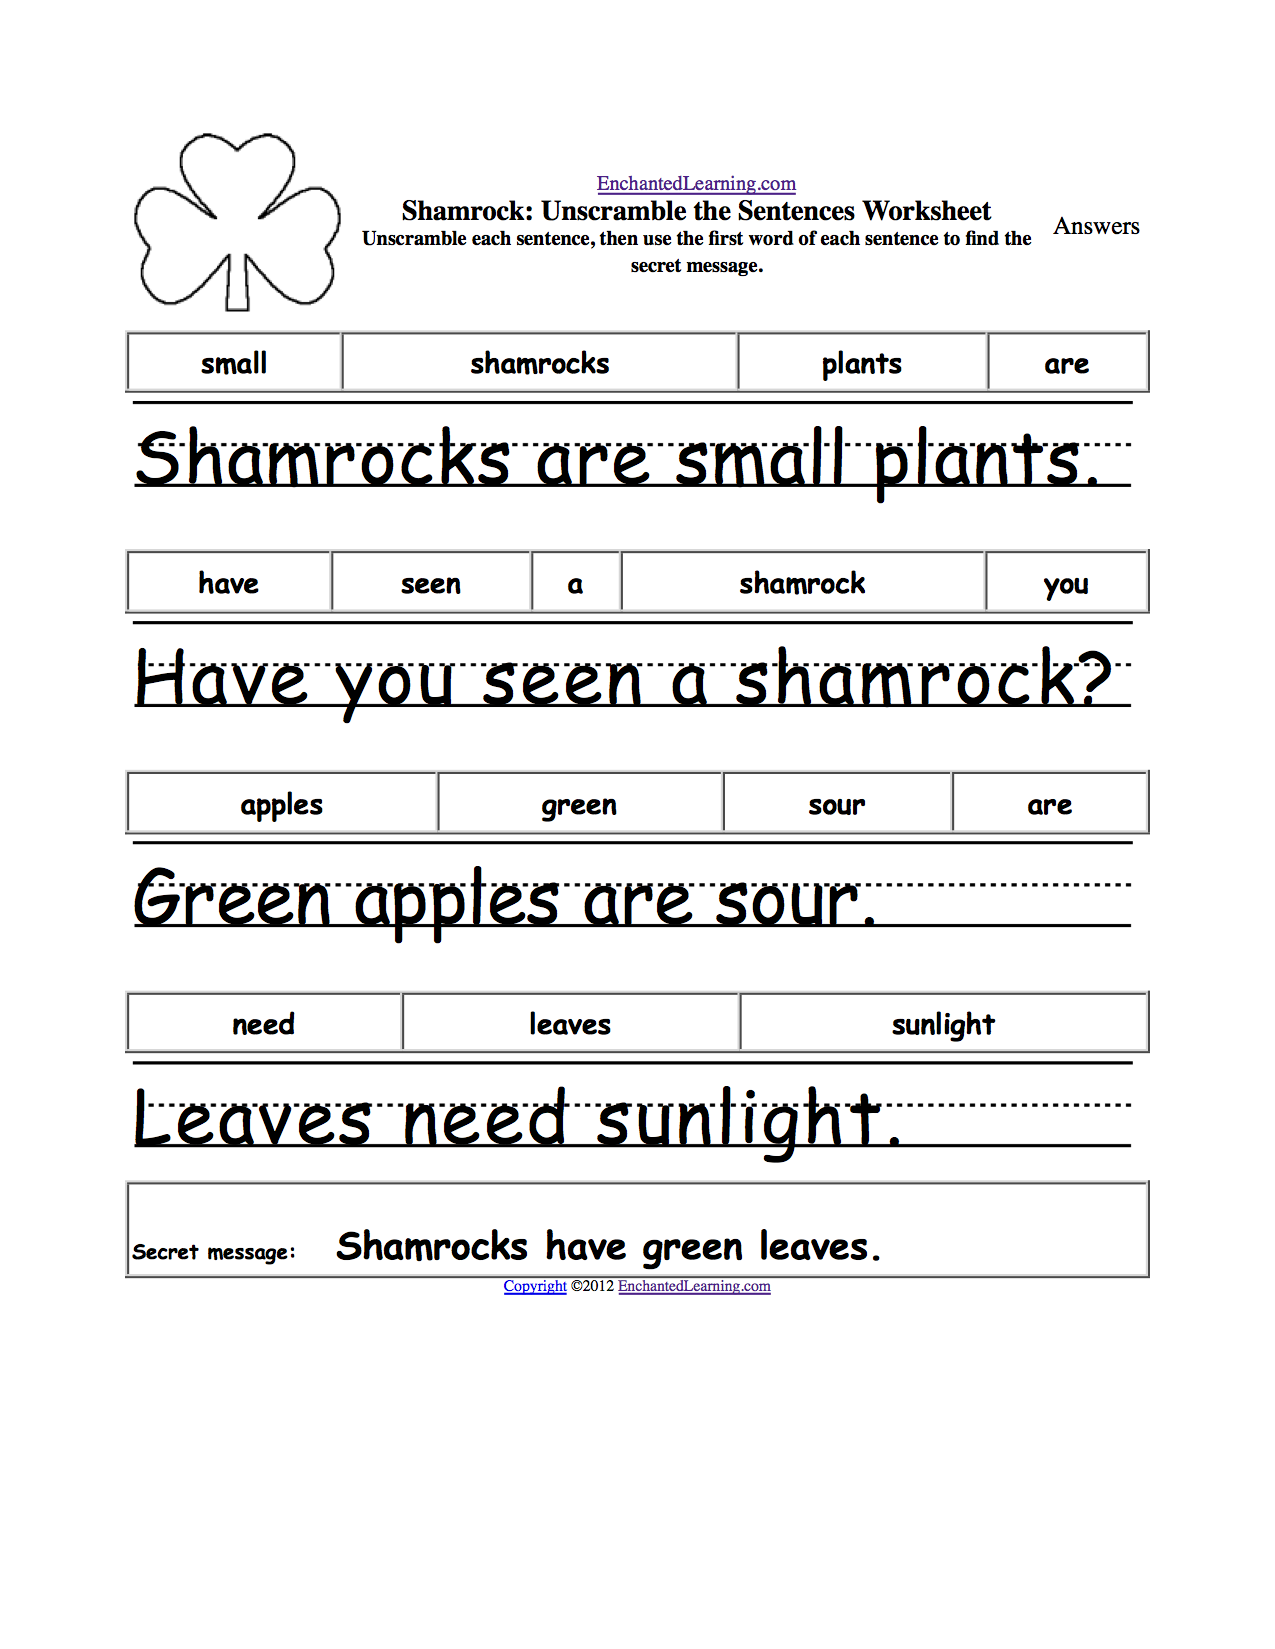 spelling-and-writing-activities-st-patrick-s-day-crafts-for-kids-enchanted-learning-software